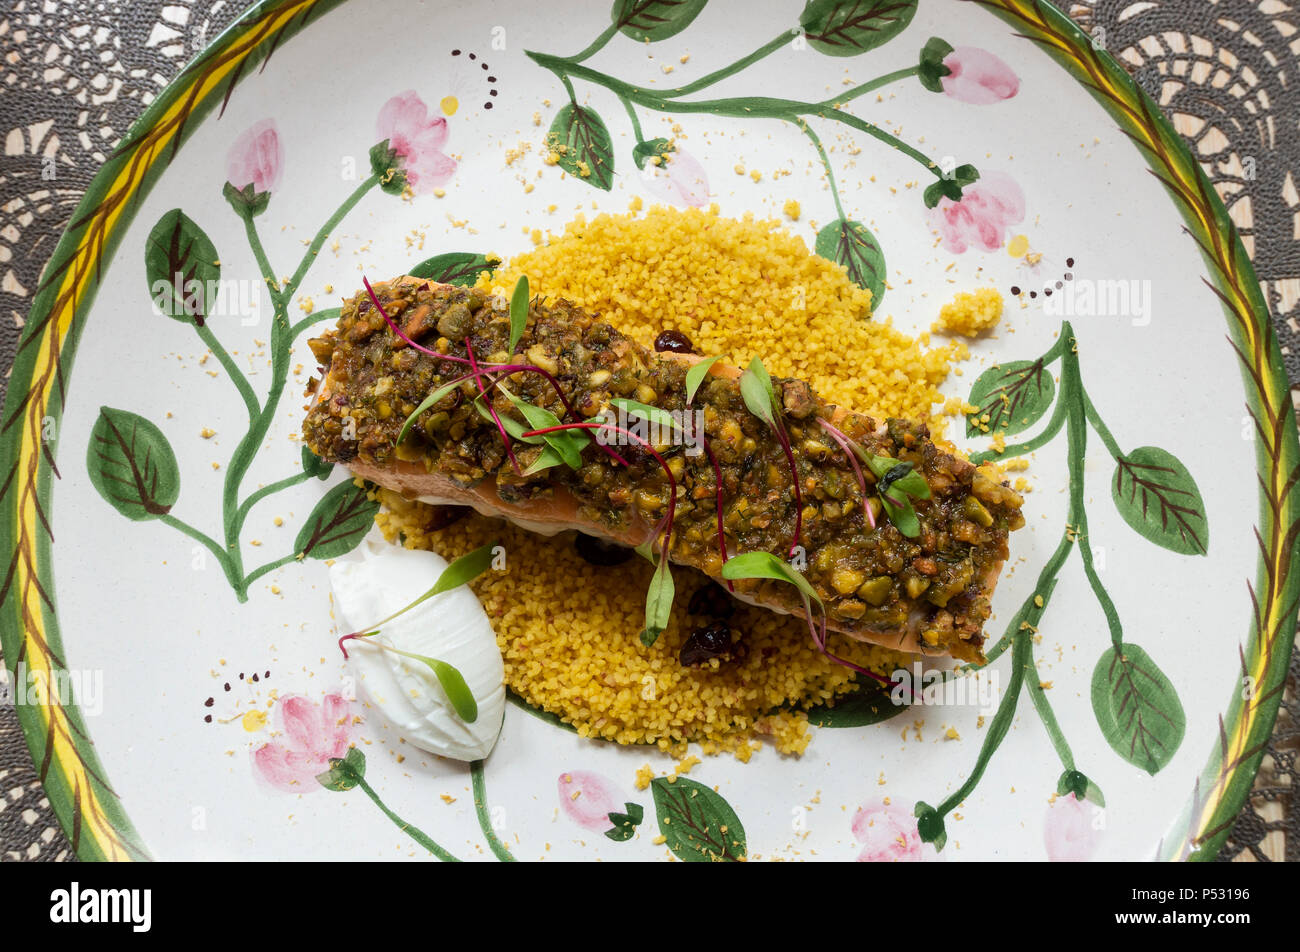 Grilled pistachio-crusted salmon and yellow rice Stock Photo